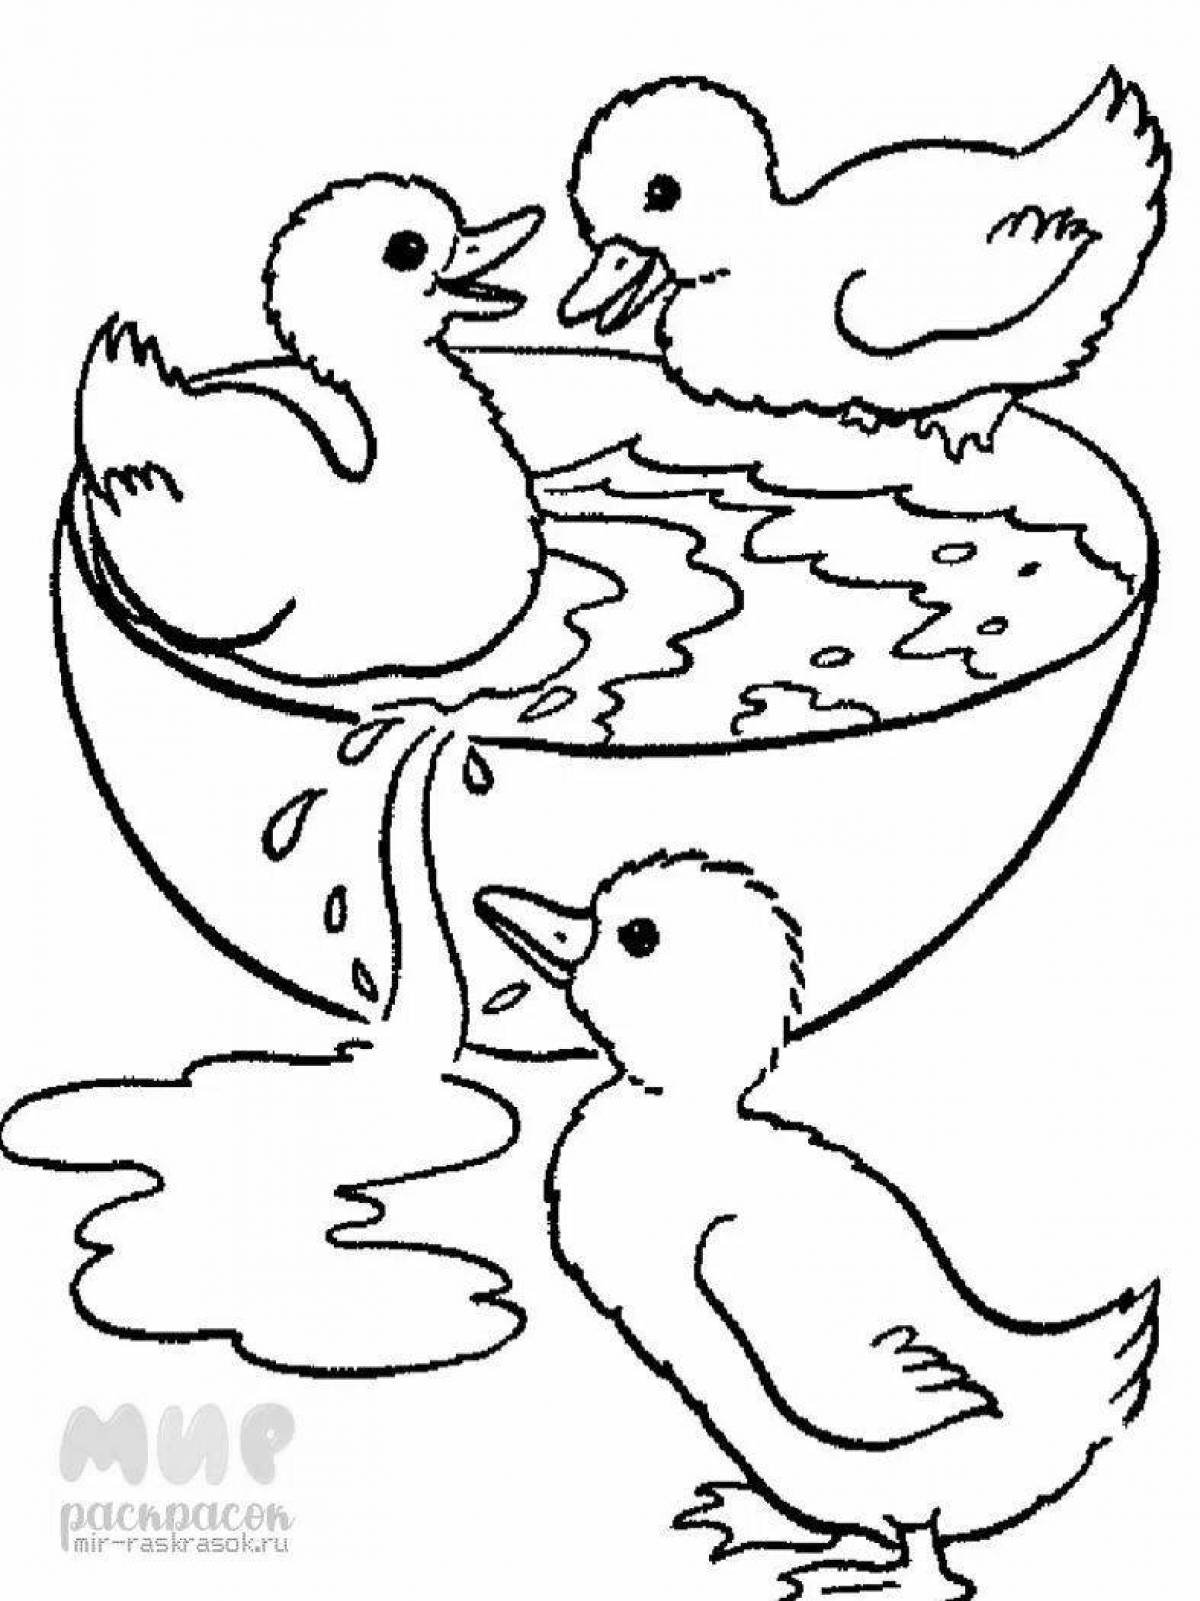 Duck coloring page for girls